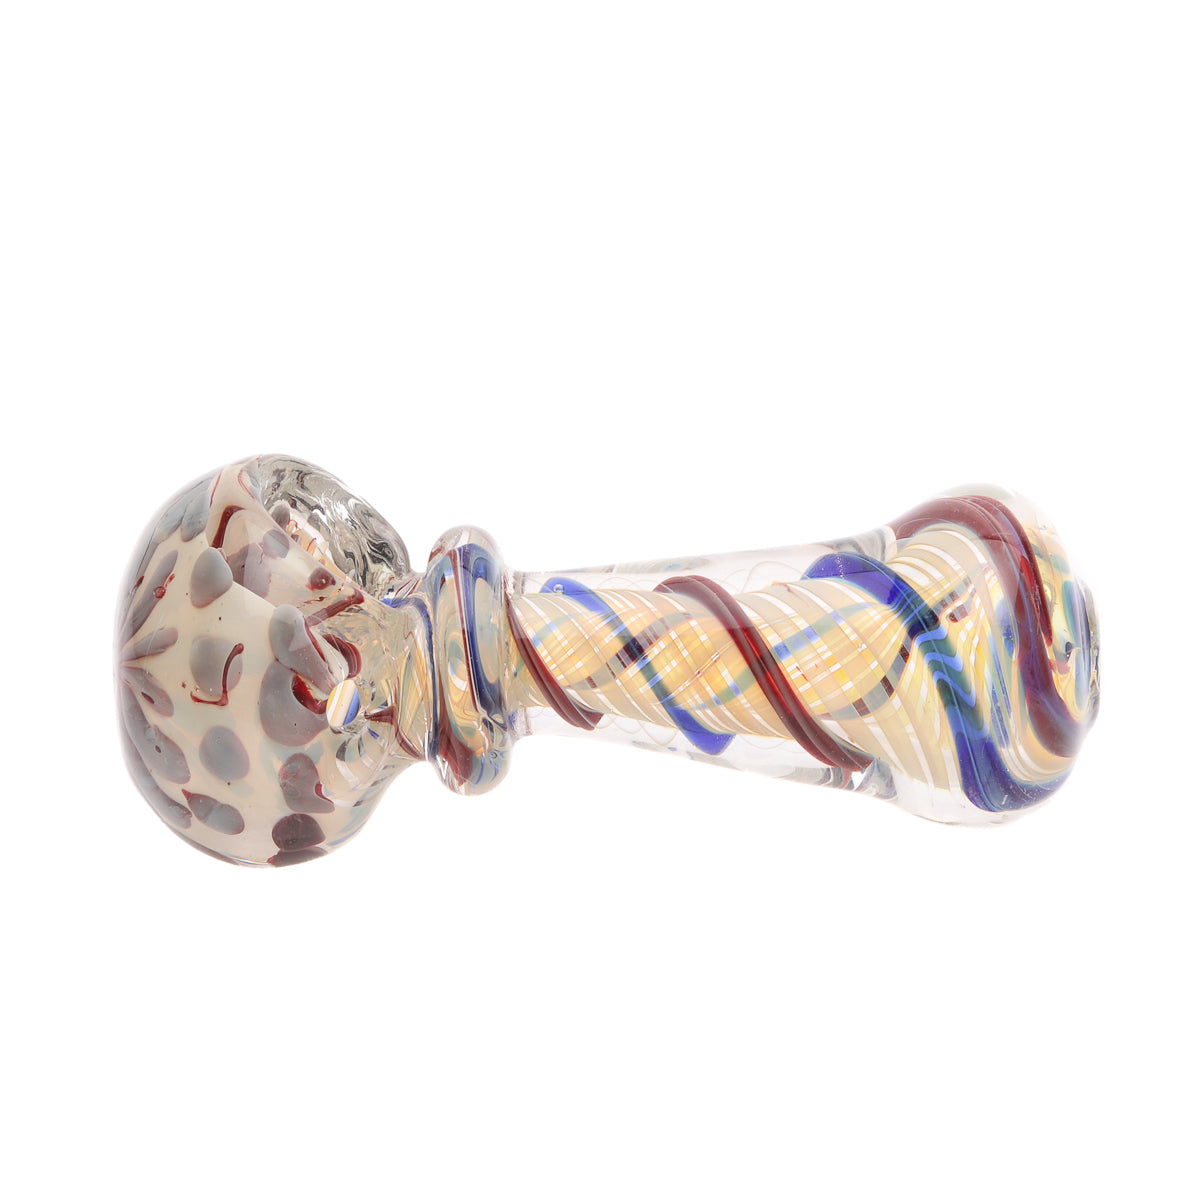 Hypnotic Whirl Spoon Pipe